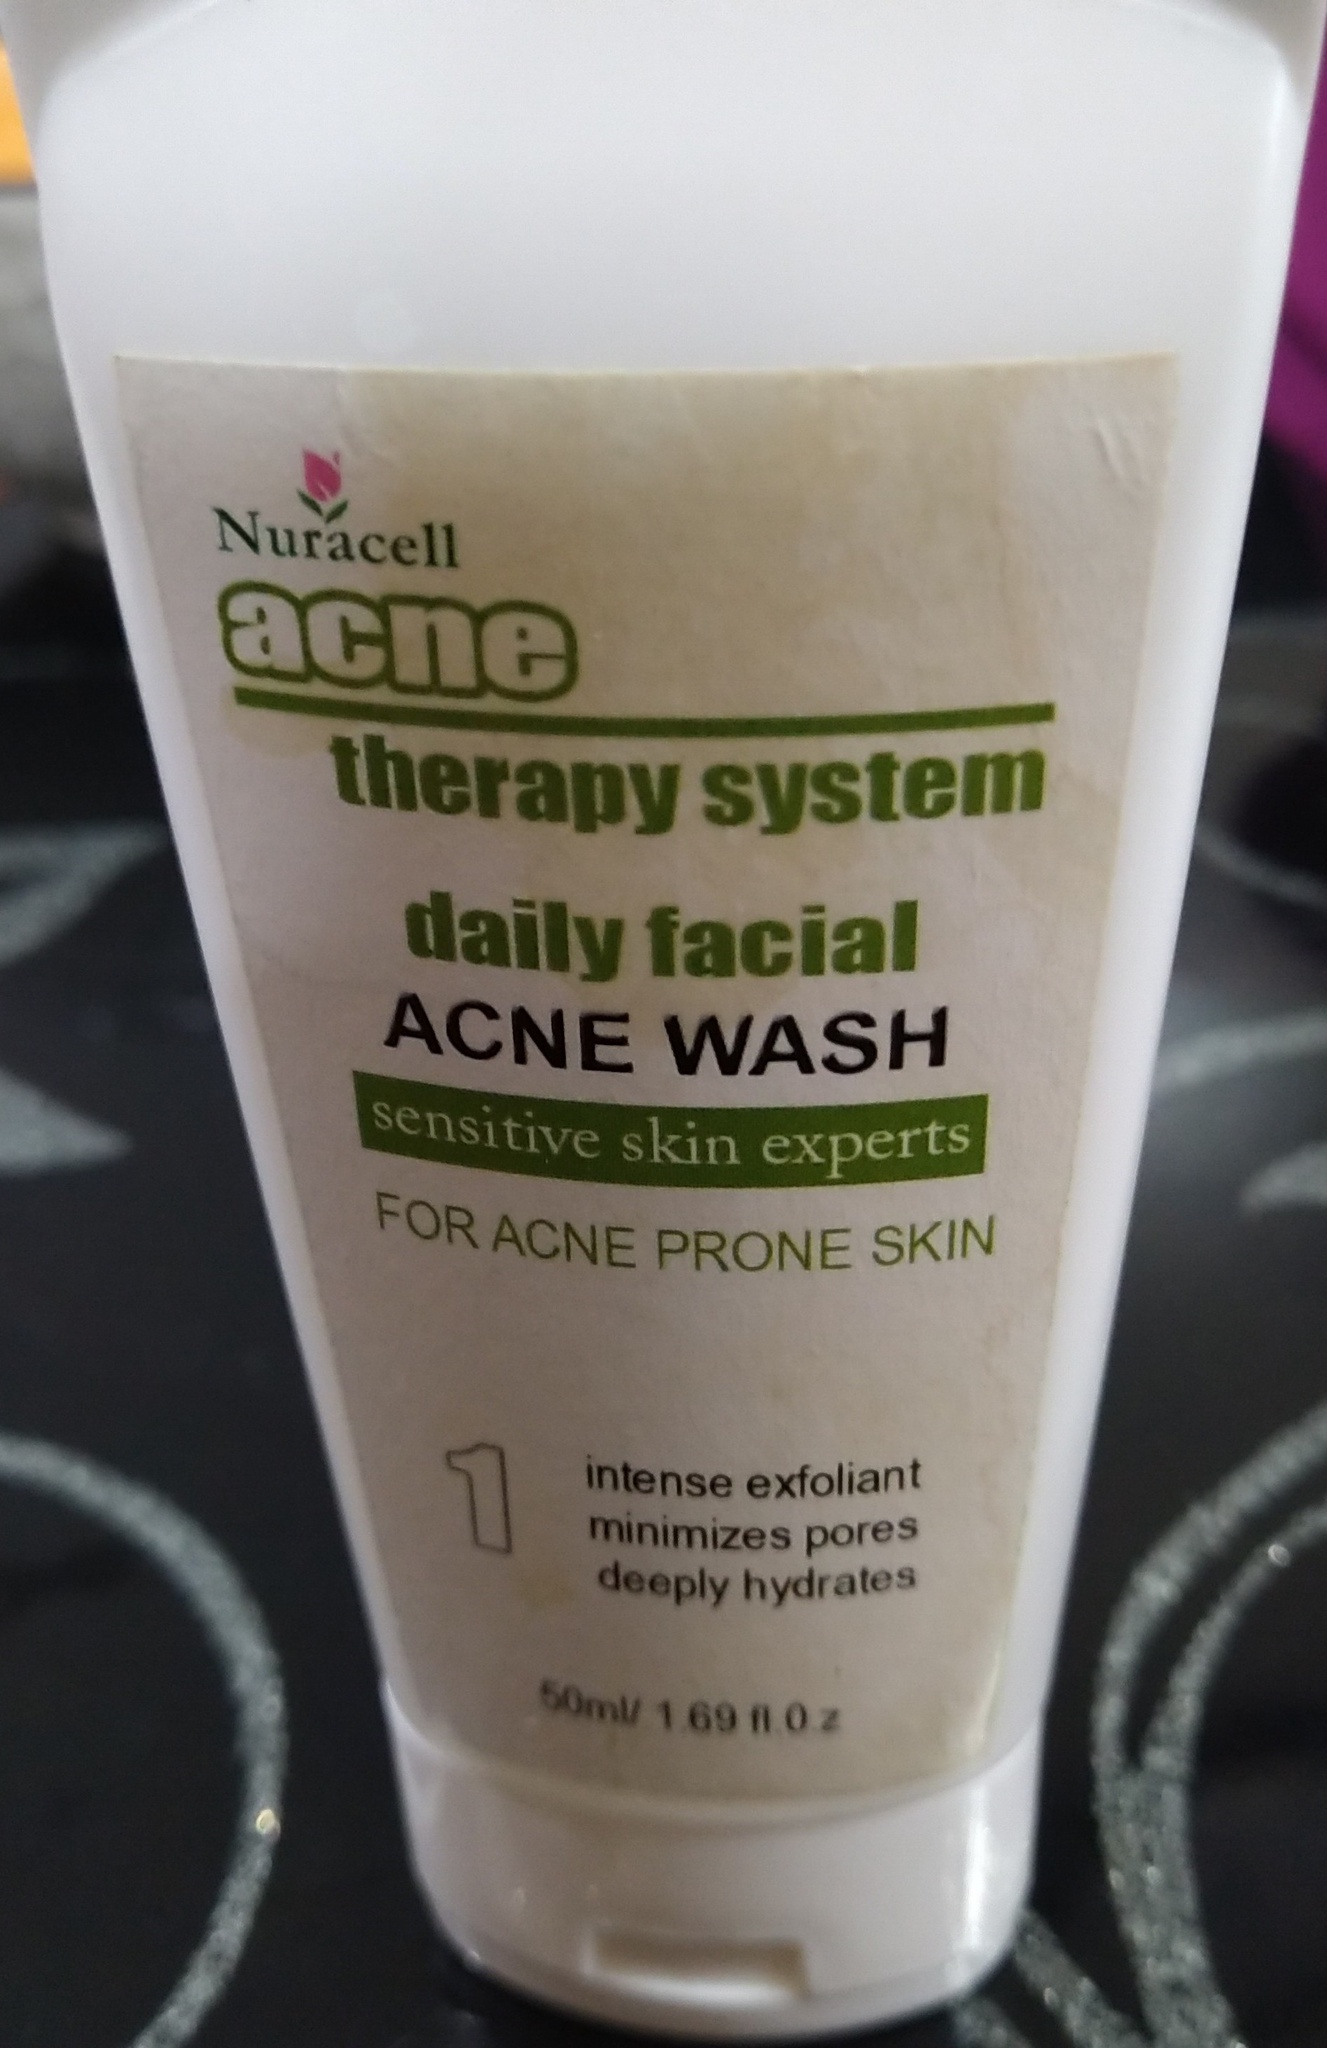 Nuracell Acne Therapy System Daily Facial Acne Wash